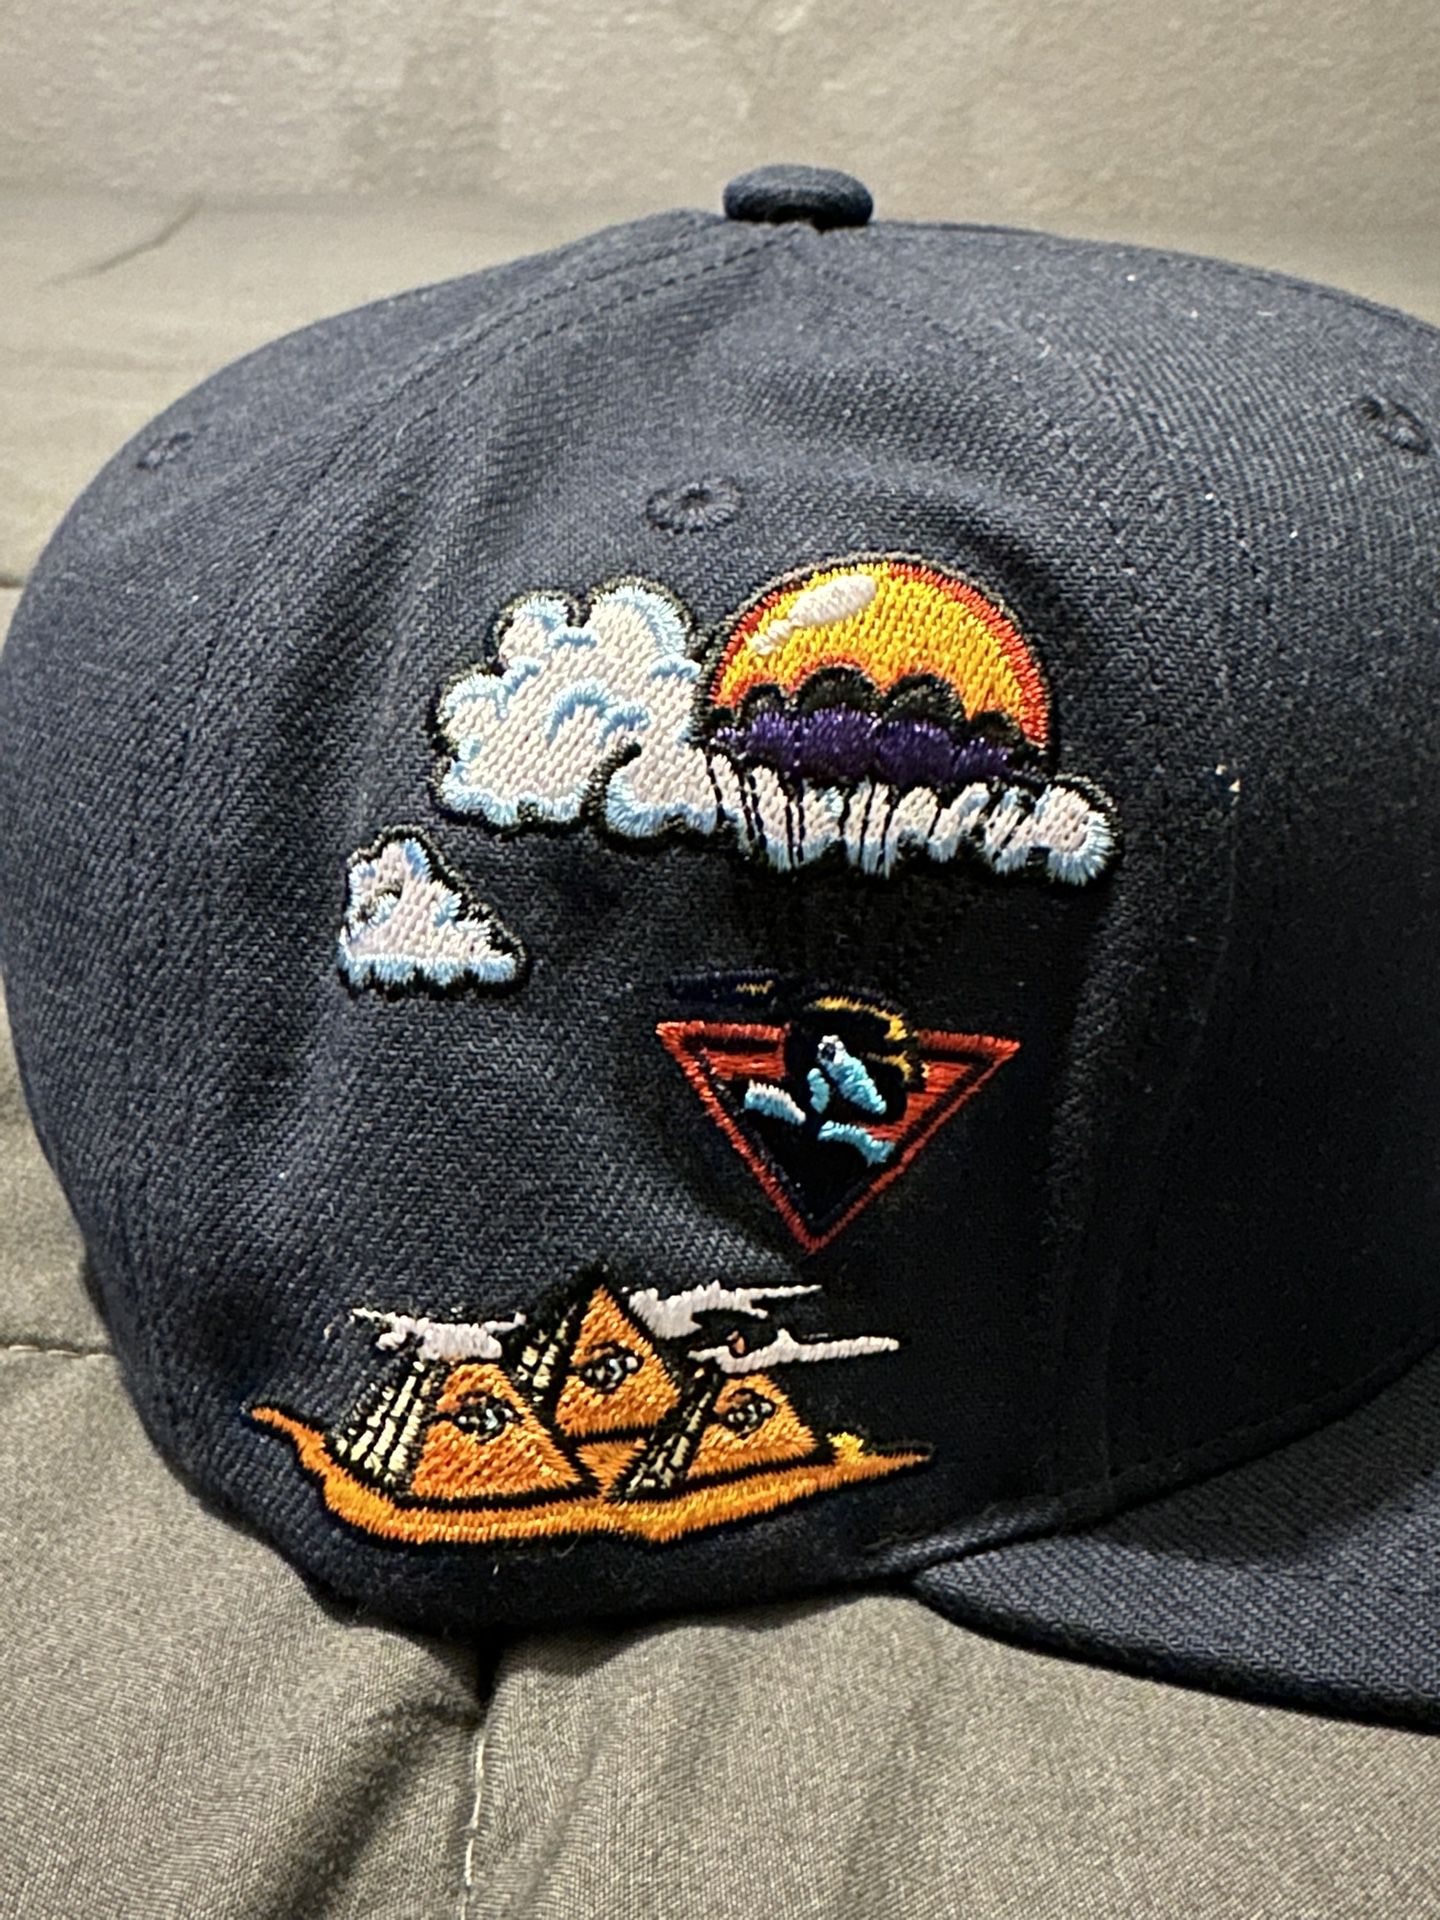 NBA Psychedelic Warriors Snapback for Sale in Modesto, CA - OfferUp